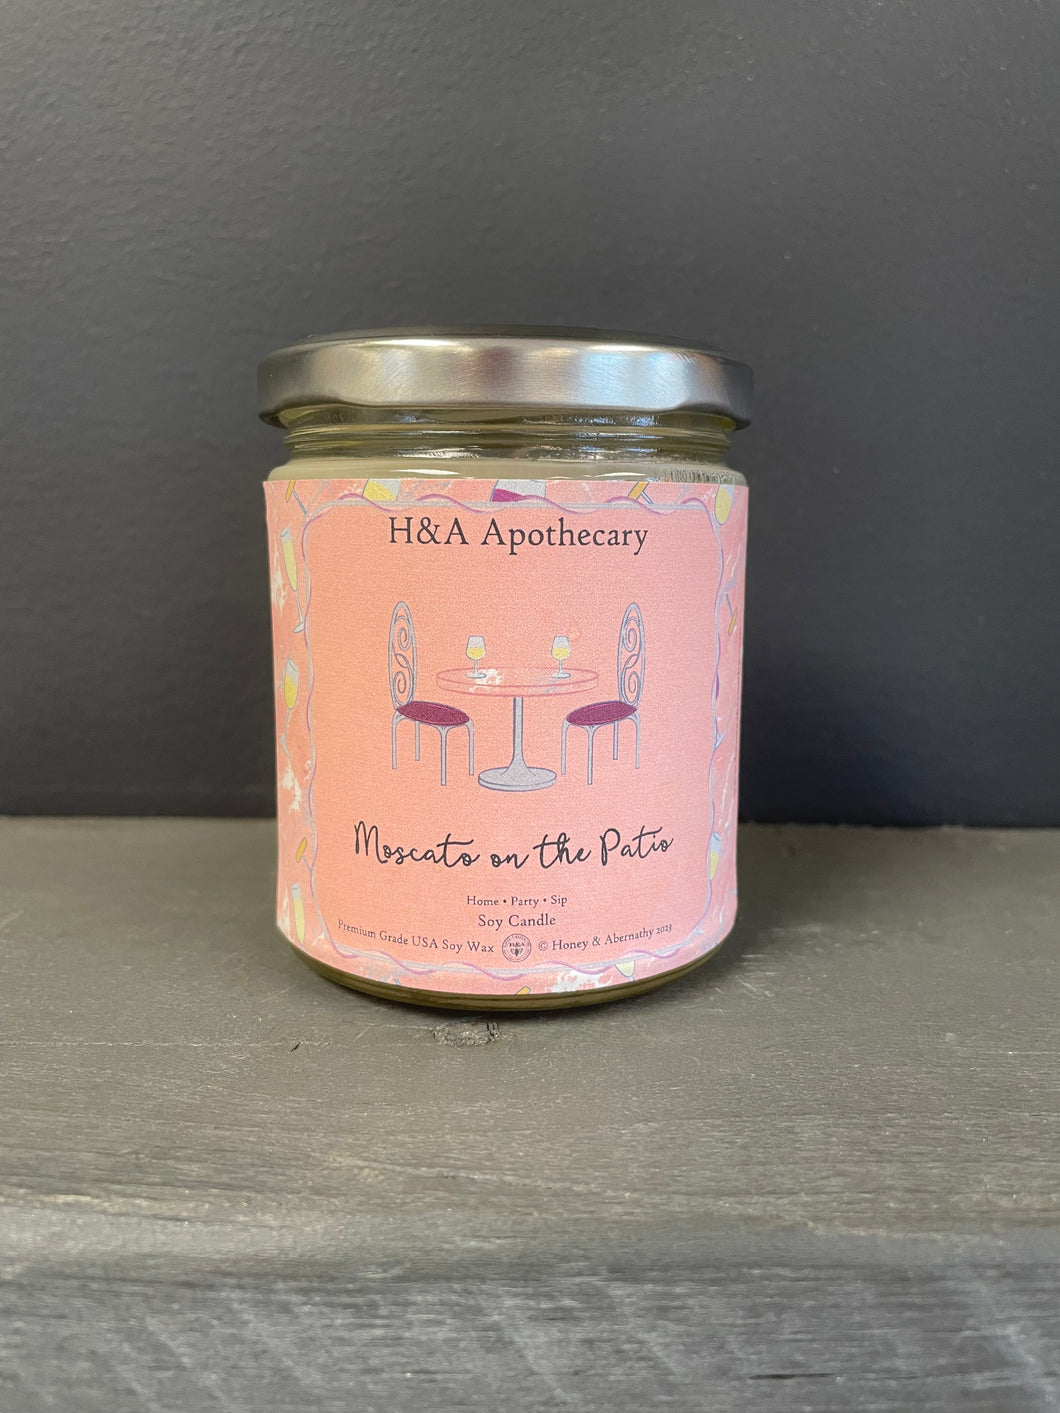 H&A Apothecary Moscato on the Patio Soy Candle